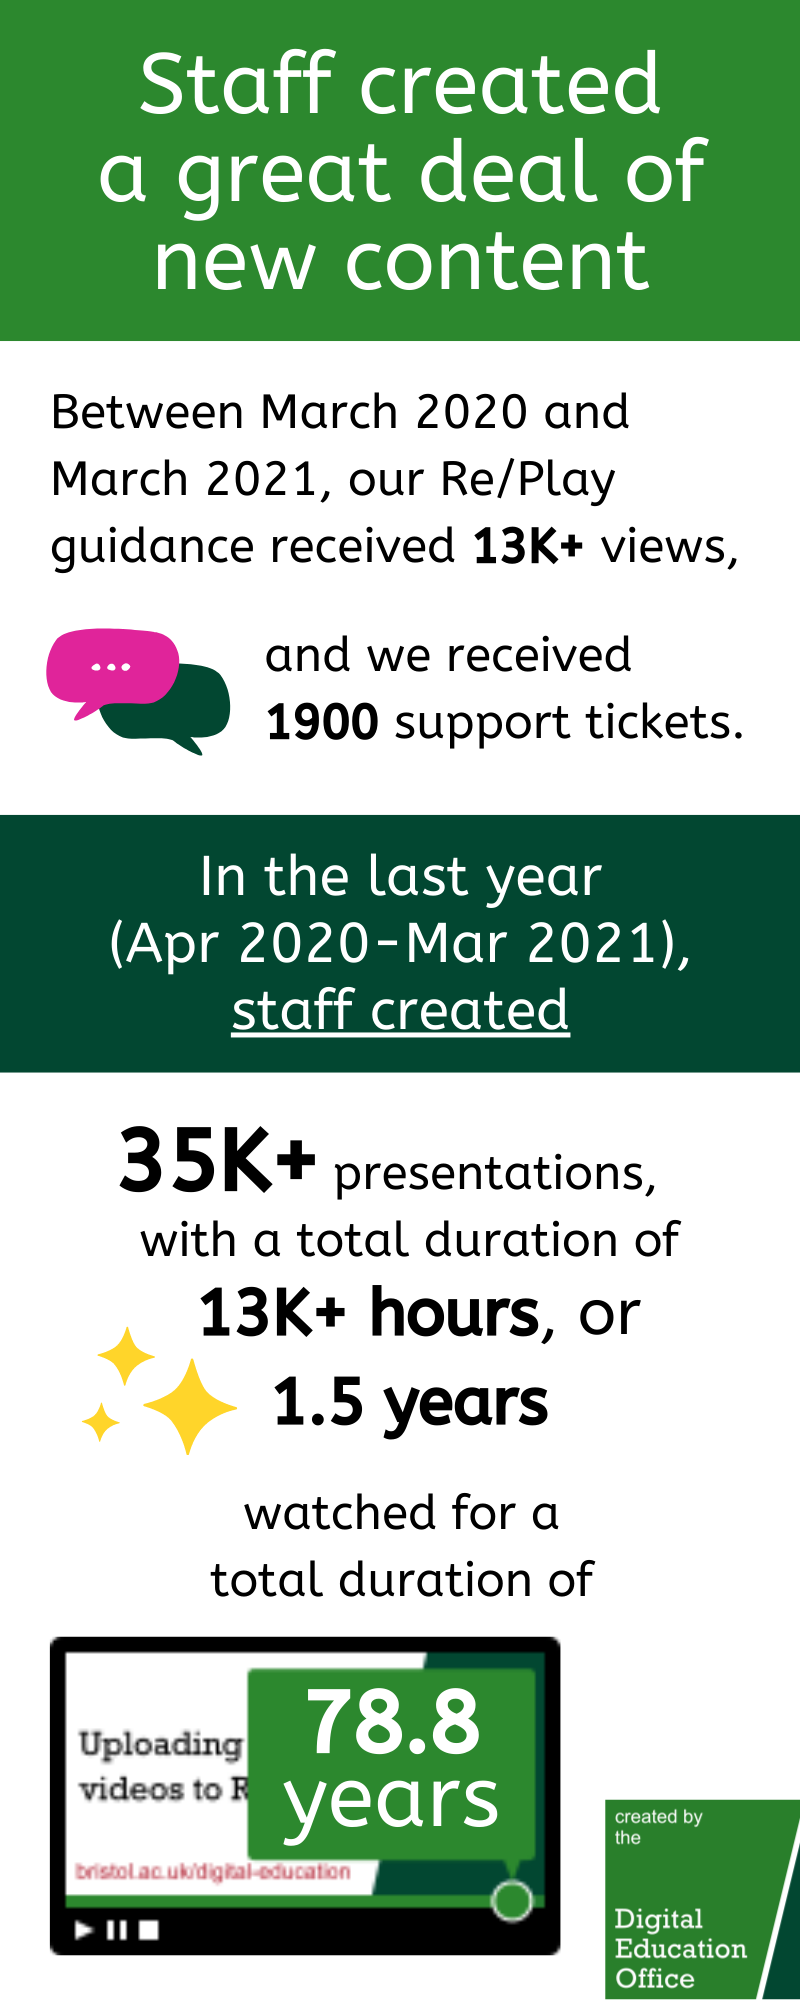 Staff created a great deal of new content. From March 2020 to March 2021 our Re/Play guidance got 13K+ views & we received 1900 support tickets. In the last year (Apr 2020 - Mar 2021) staff created 35K+ presentations with a total duration of 13K+ hours, or 1.5 years, watched for a total duration of 78.8 years.